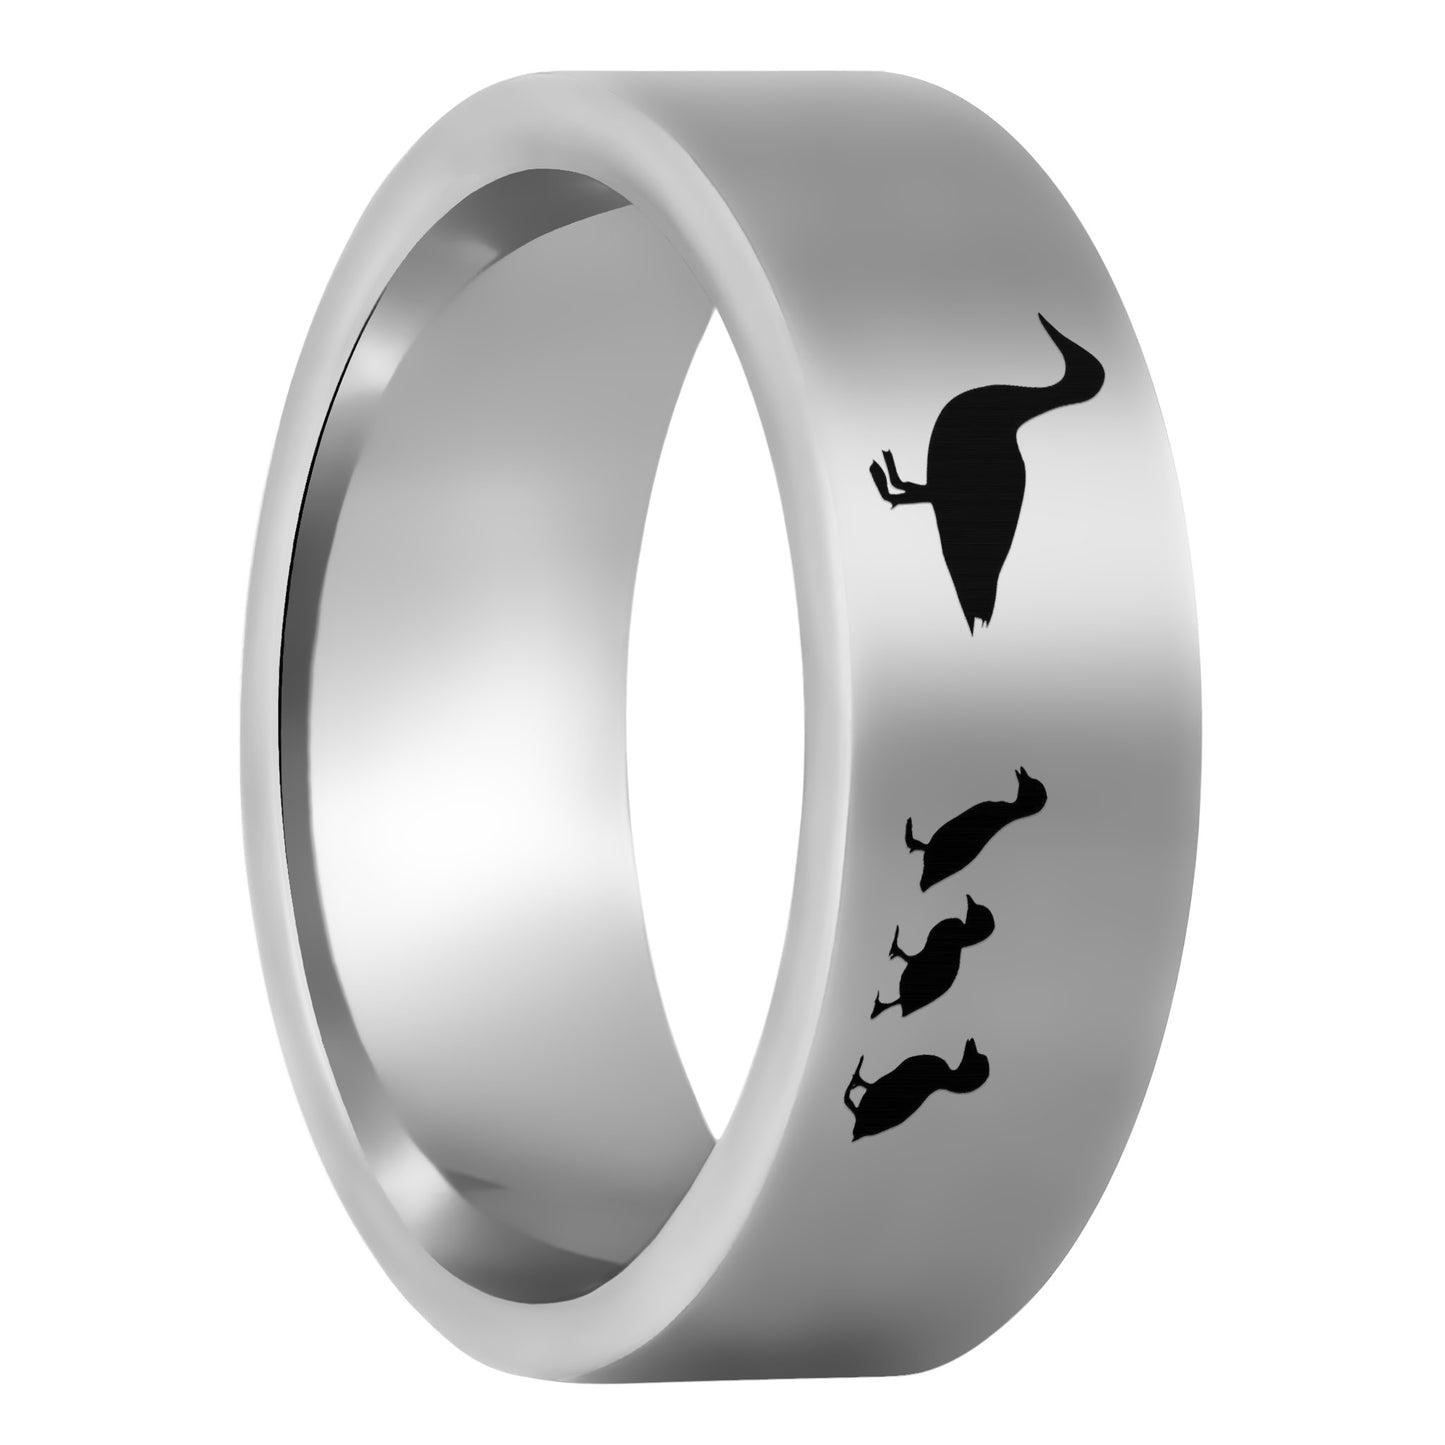 One Duck & Ducklings Tungsten Men's Wedding Band displayed on a plain white background